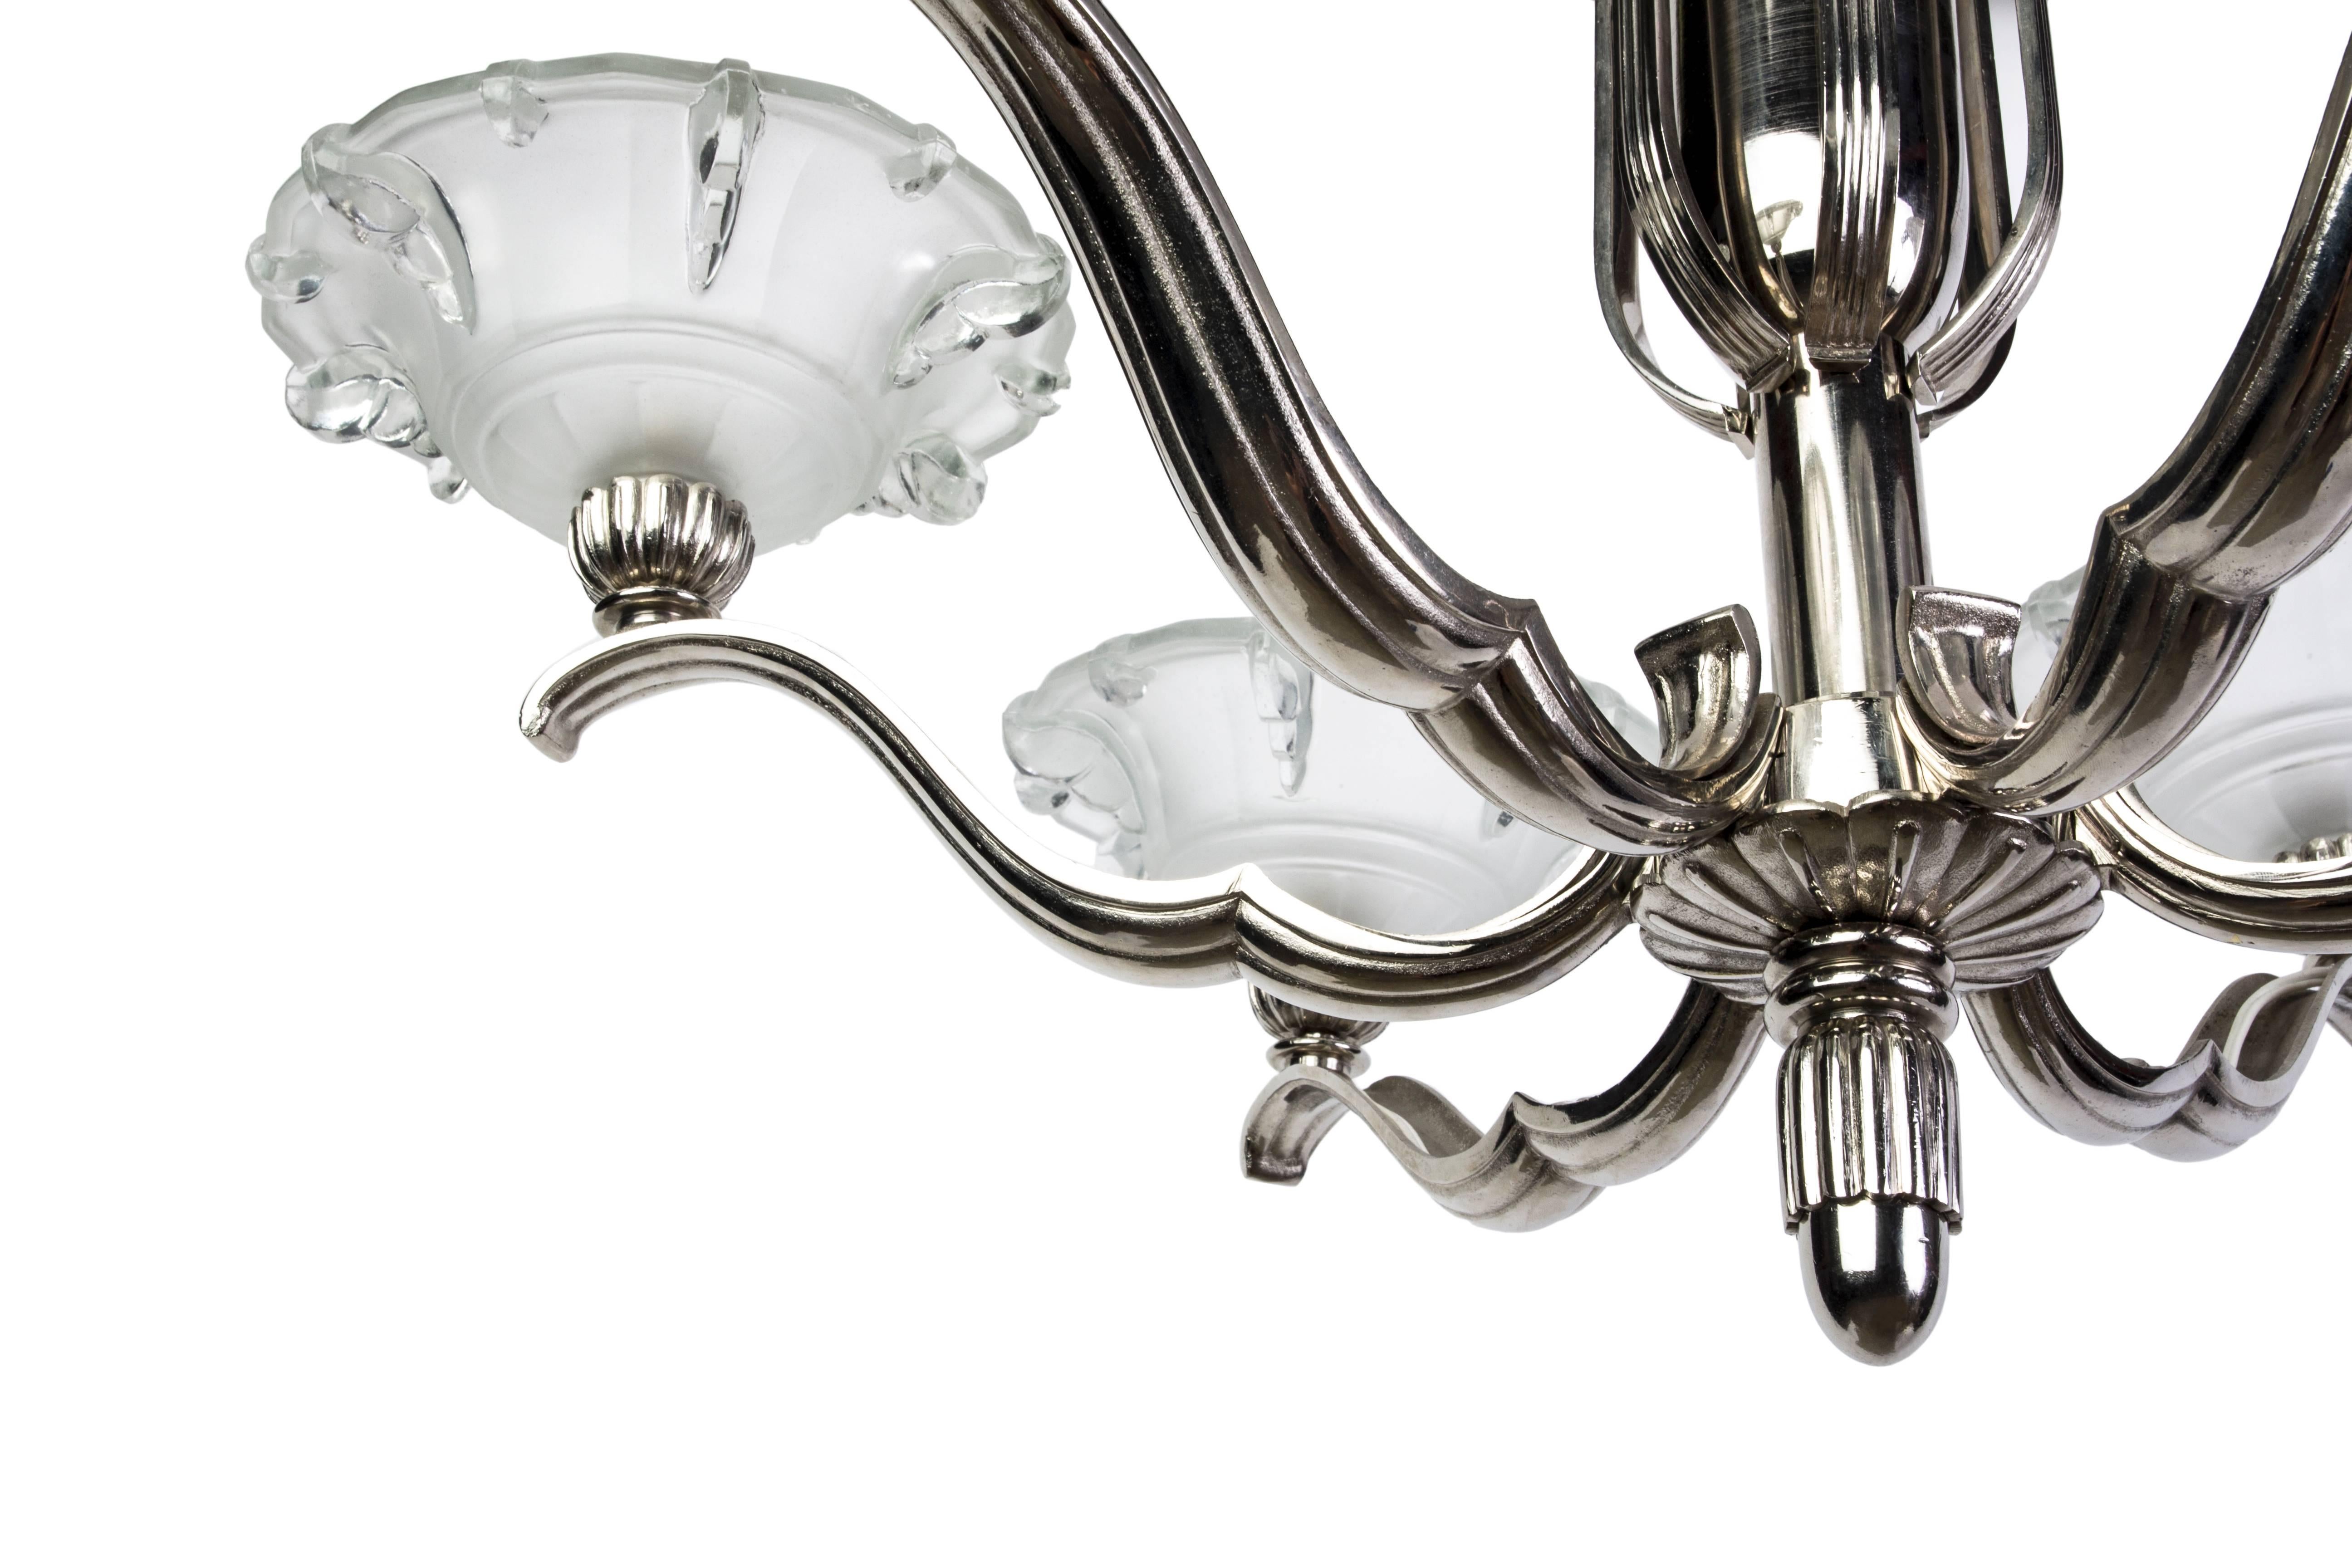 Molded Exceptional French 1930s Art Deco Chandelier by Petitot For Sale